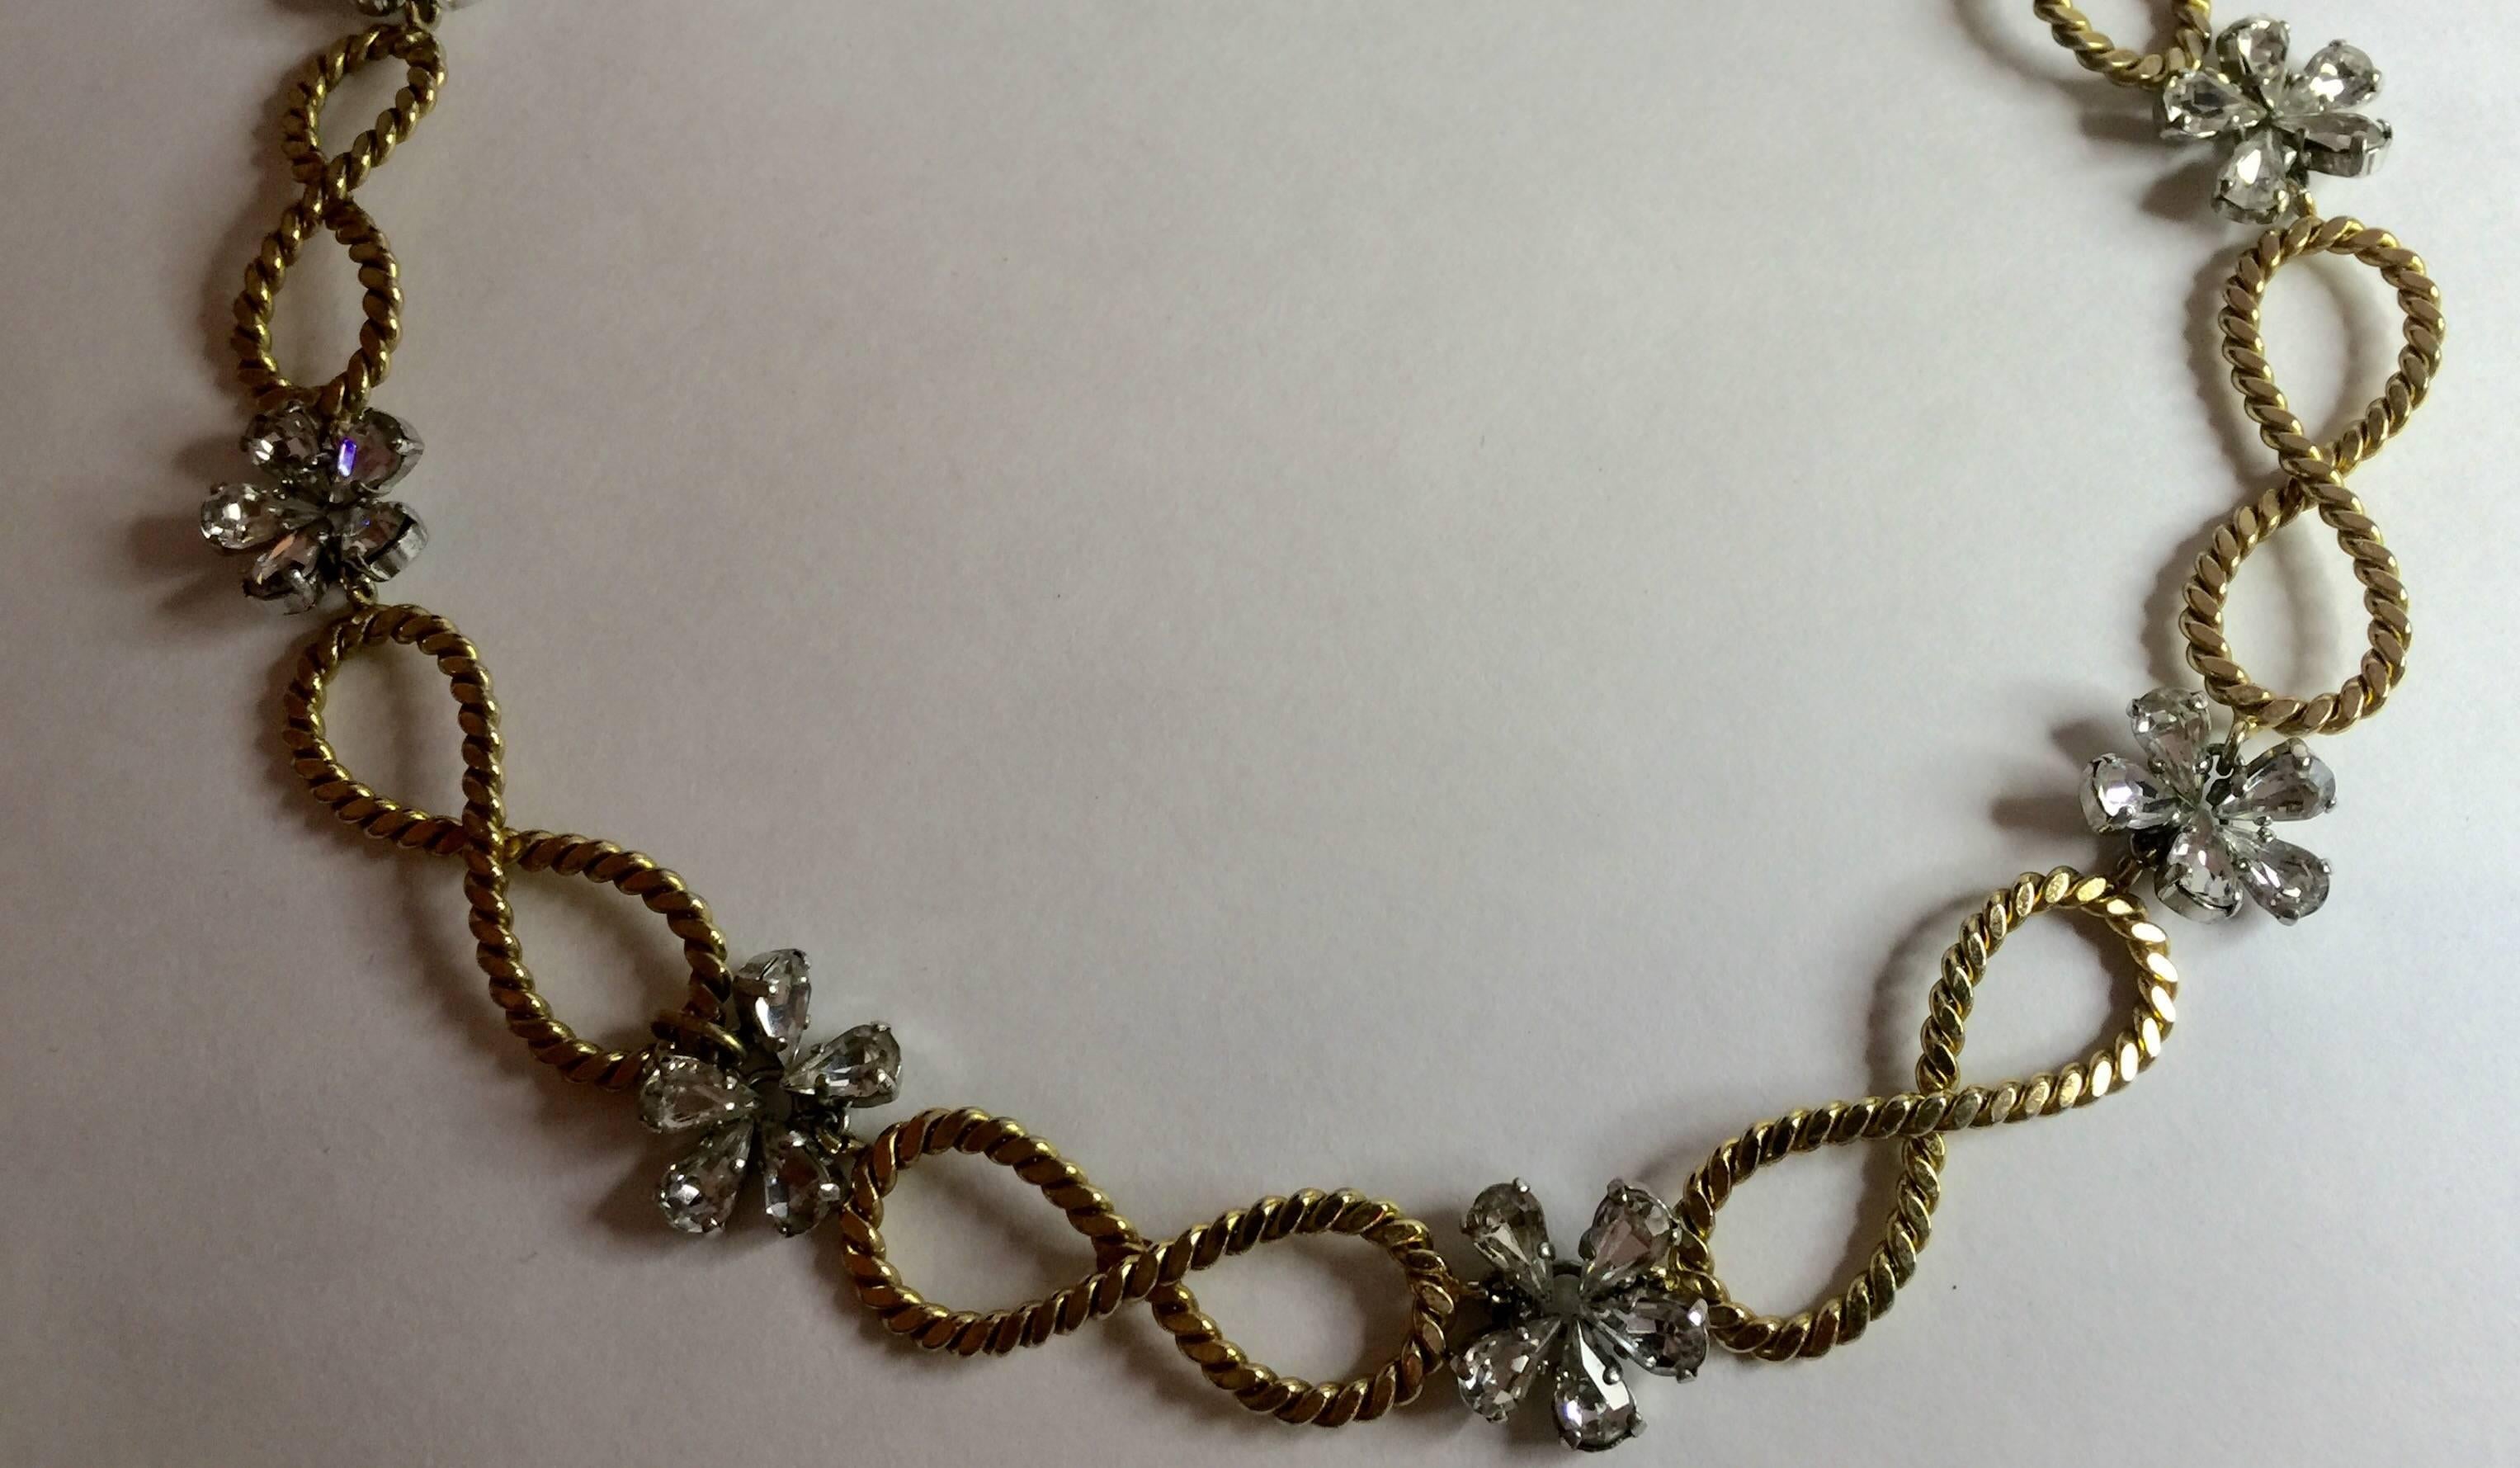 This 1950's CHRISTIAN DIOR Braided Looped and Floral Rhinestone Necklace is a lovely example of late 50's style , restraint and elegance in fashion. An era in the USA marked by Mamie Eisenhower's style and choices, this subtle, fine and small scale